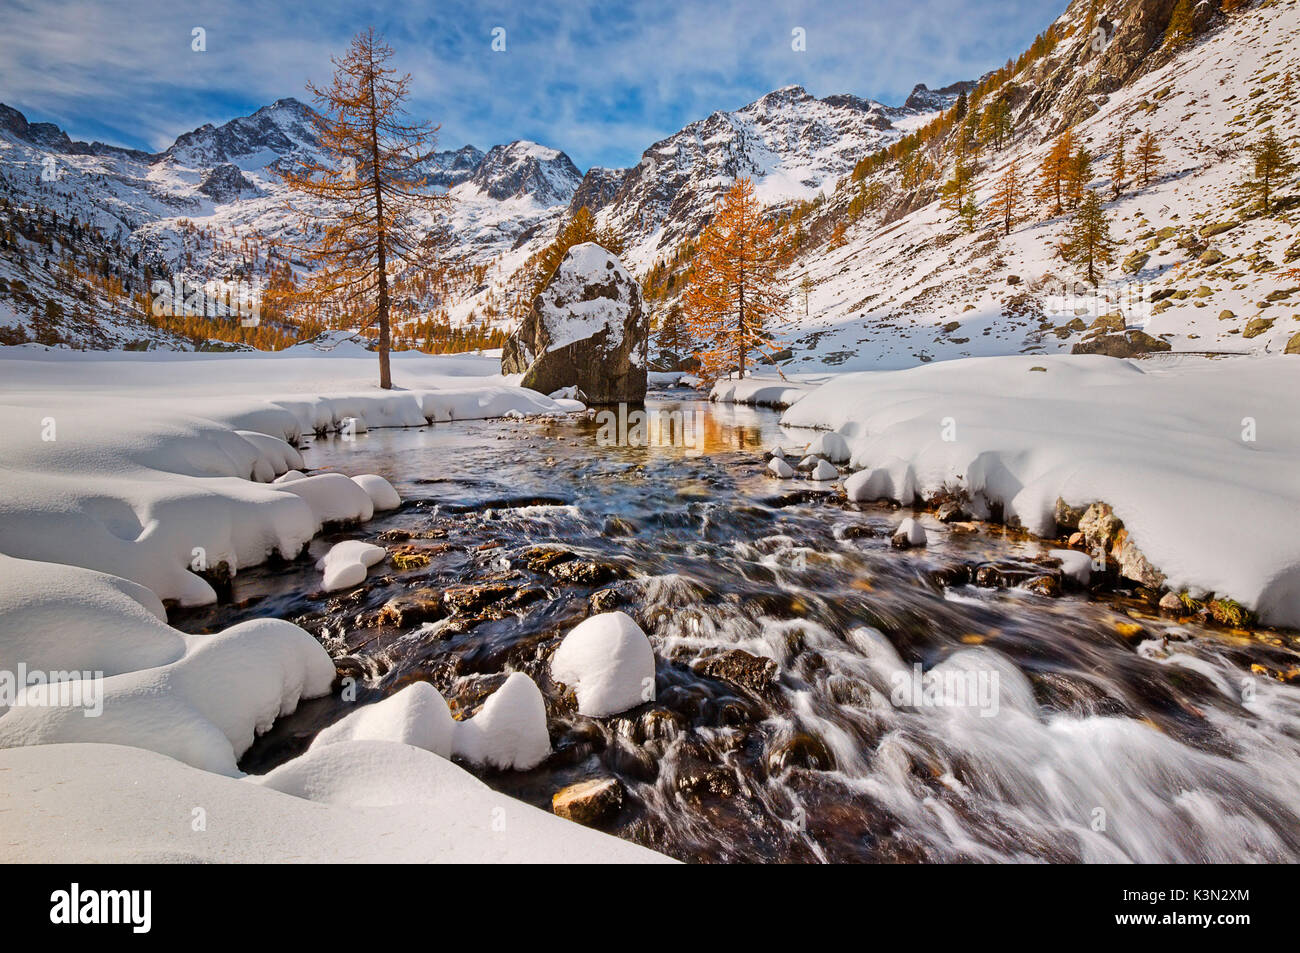 Italy, Piedmont, Cuneo District, Gesso Valley, Alpi Marittime Natural Park, the beginning of winter to the Valasco Plain Stock Photo